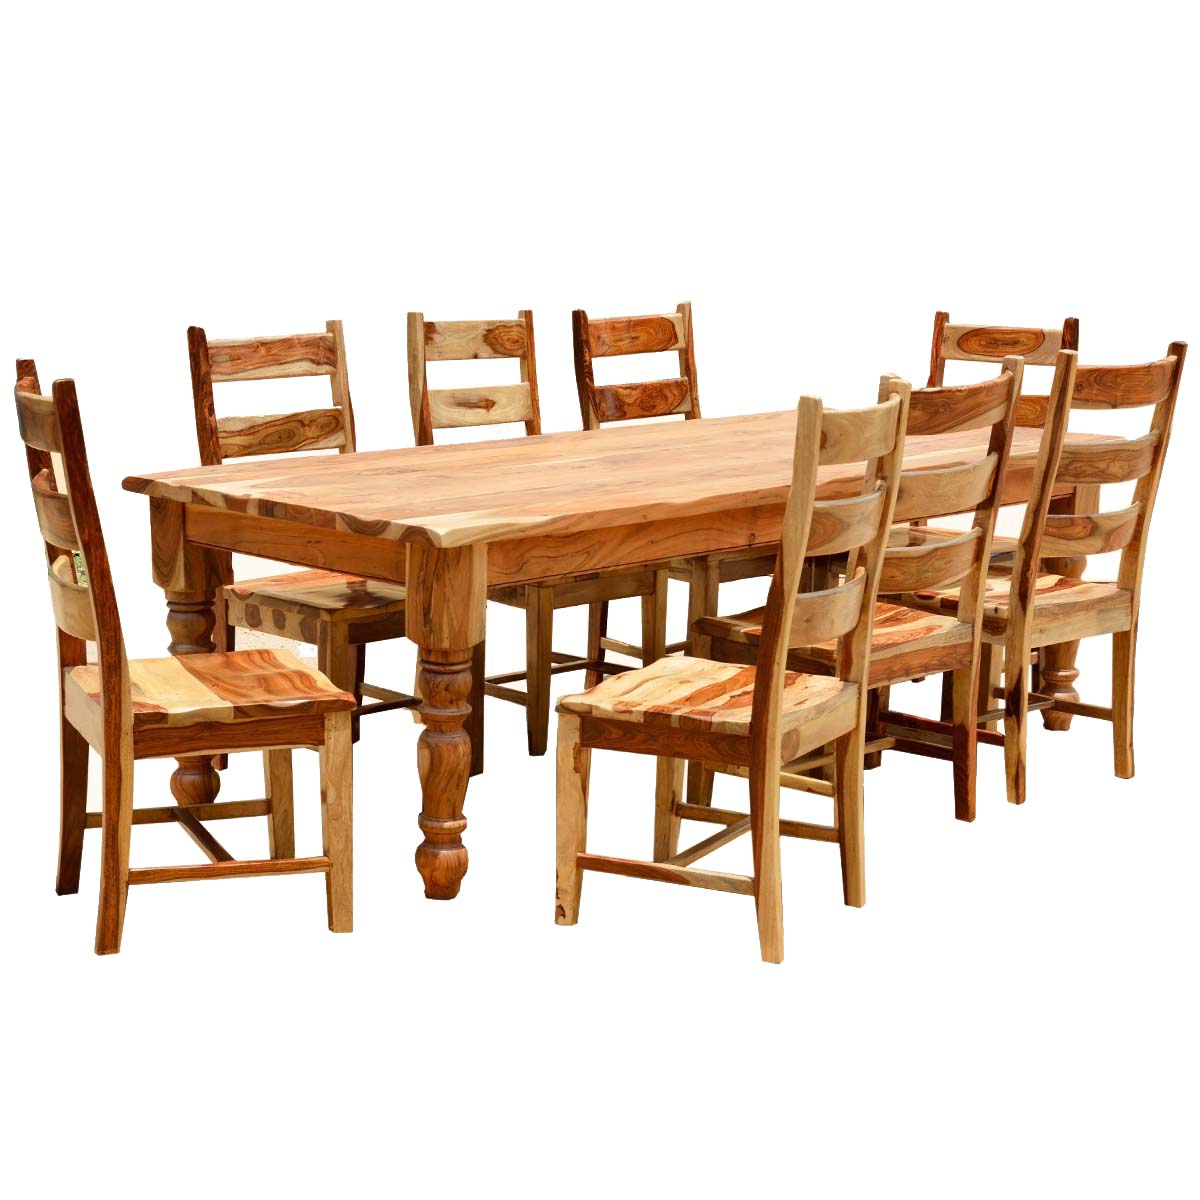 rustic dining set with bench photo - 8